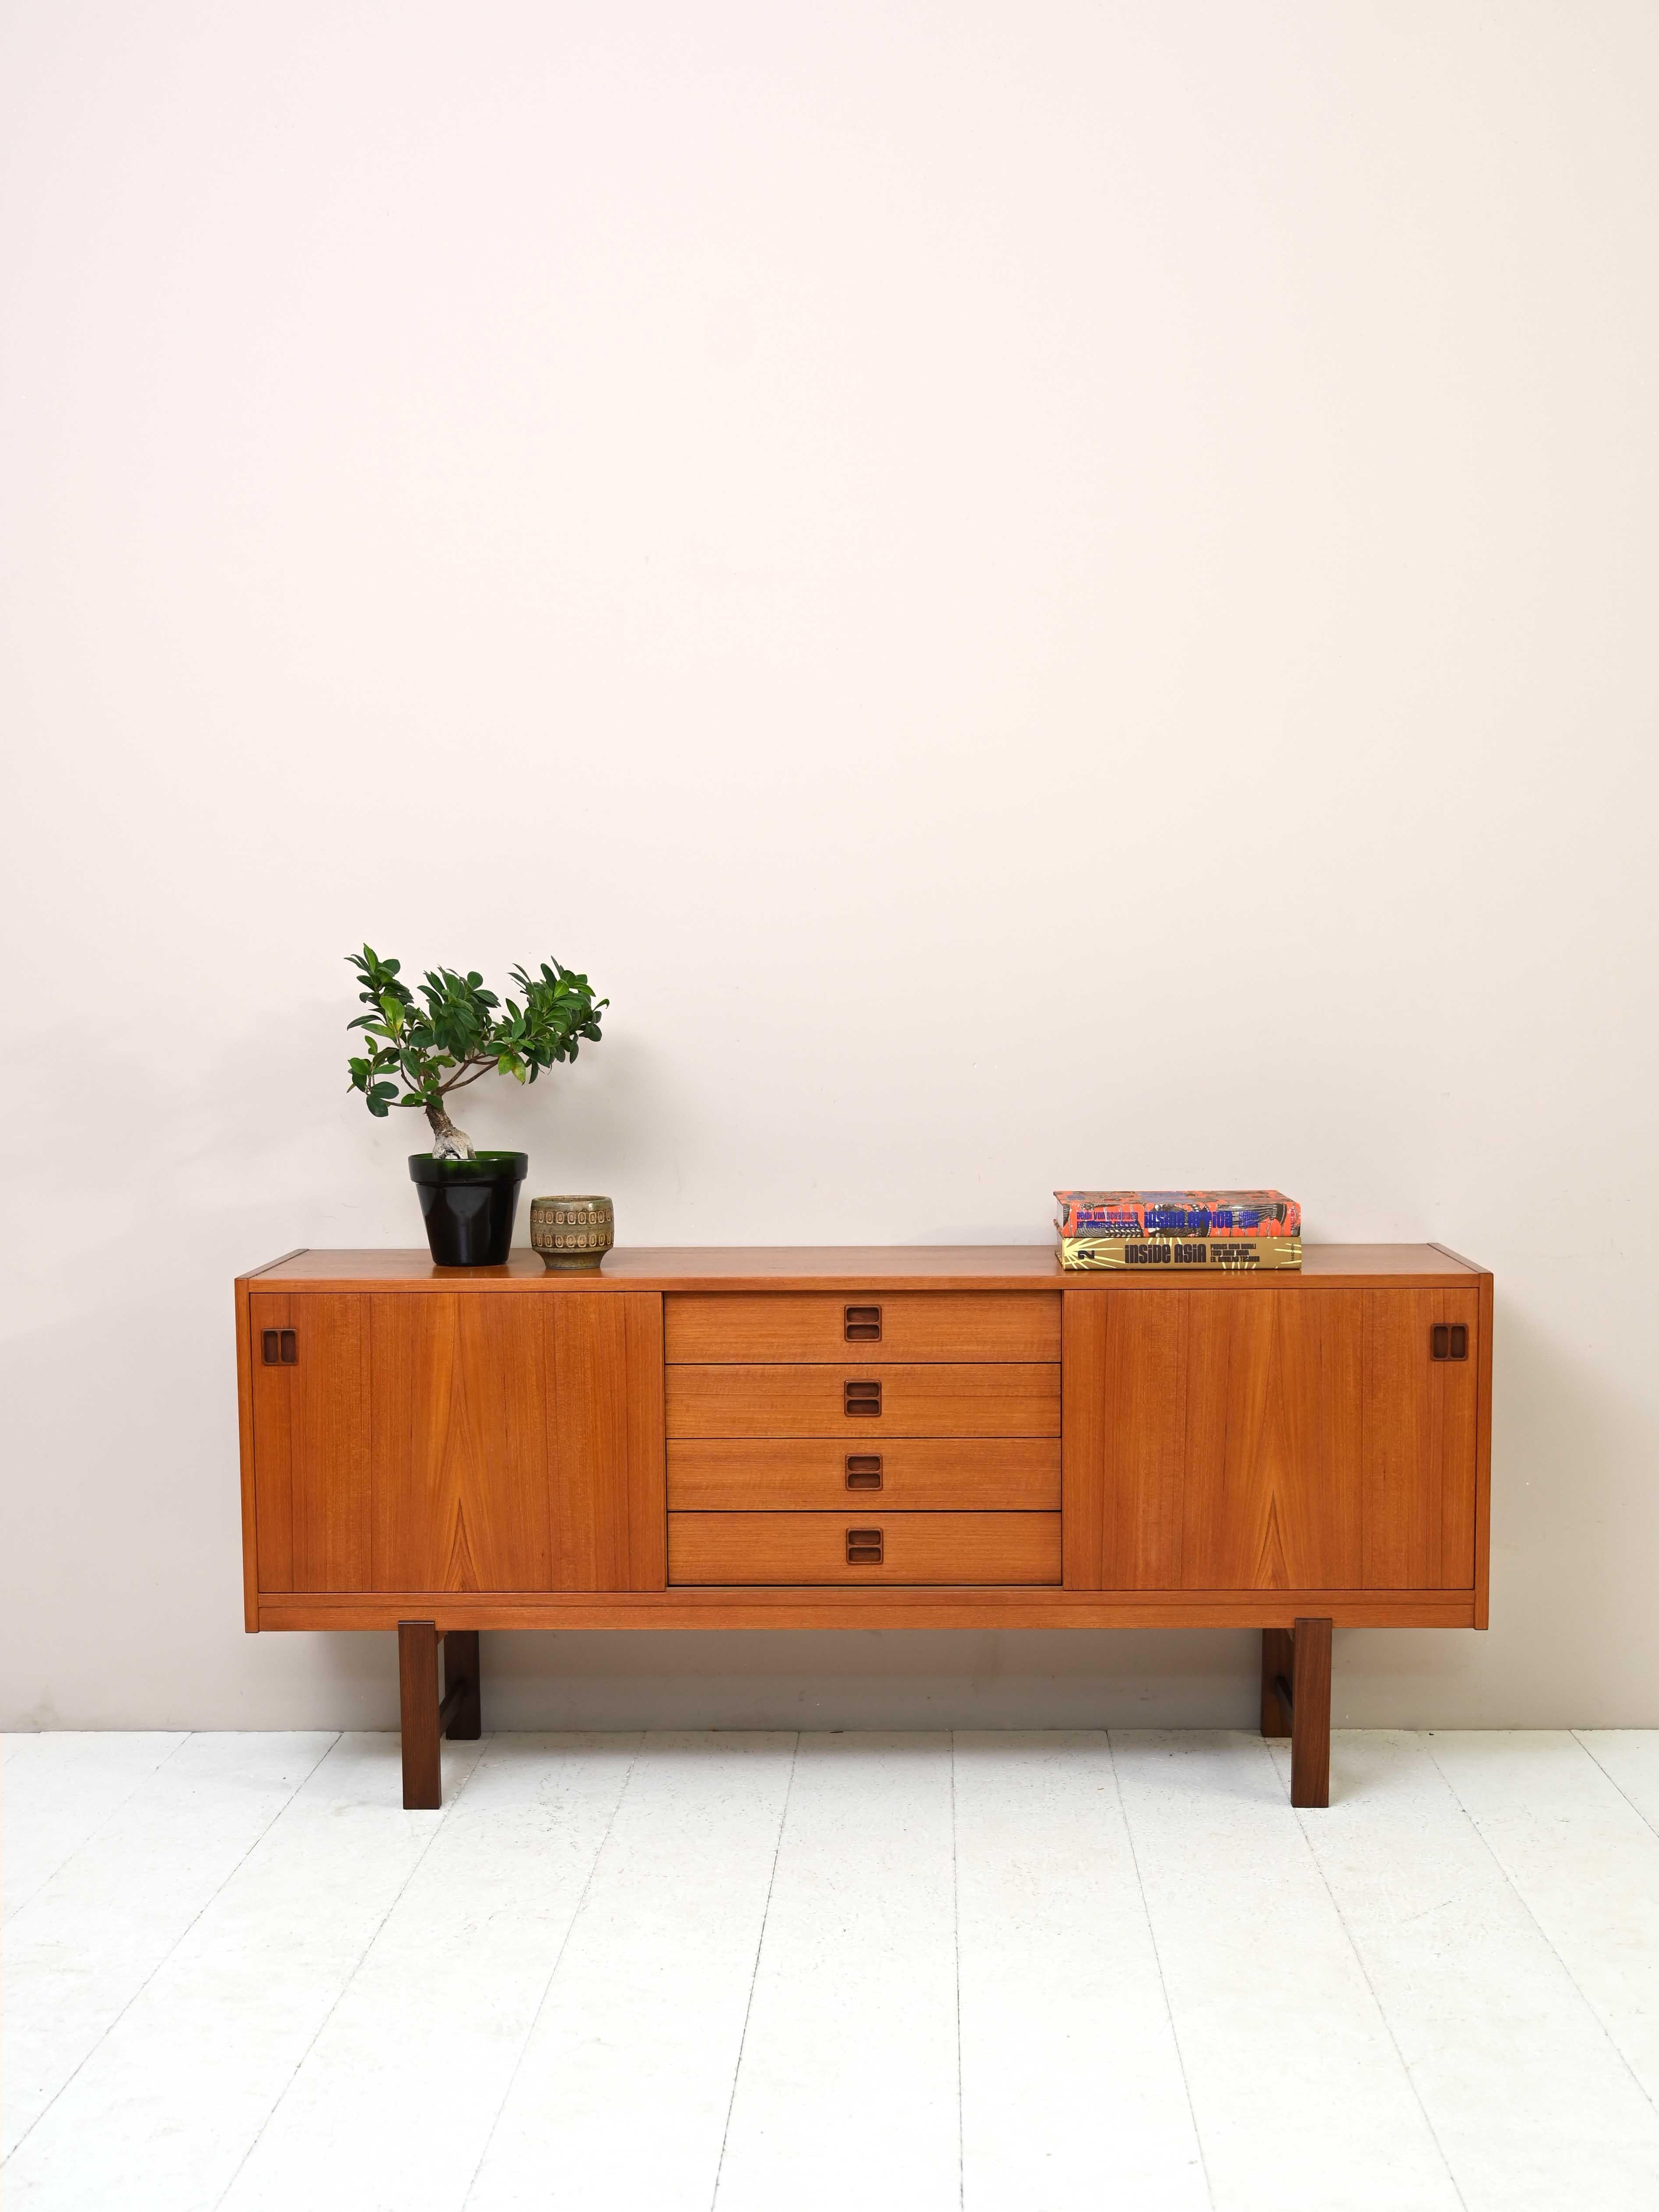 Vintage 1960s teak sideboard.
 
This classic and elegant piece of furniture features two compartments on the sides with sliding doors and 4 central drawers. The carved wooden handle gives it a unique and distinctive look.
She squared Teak wood